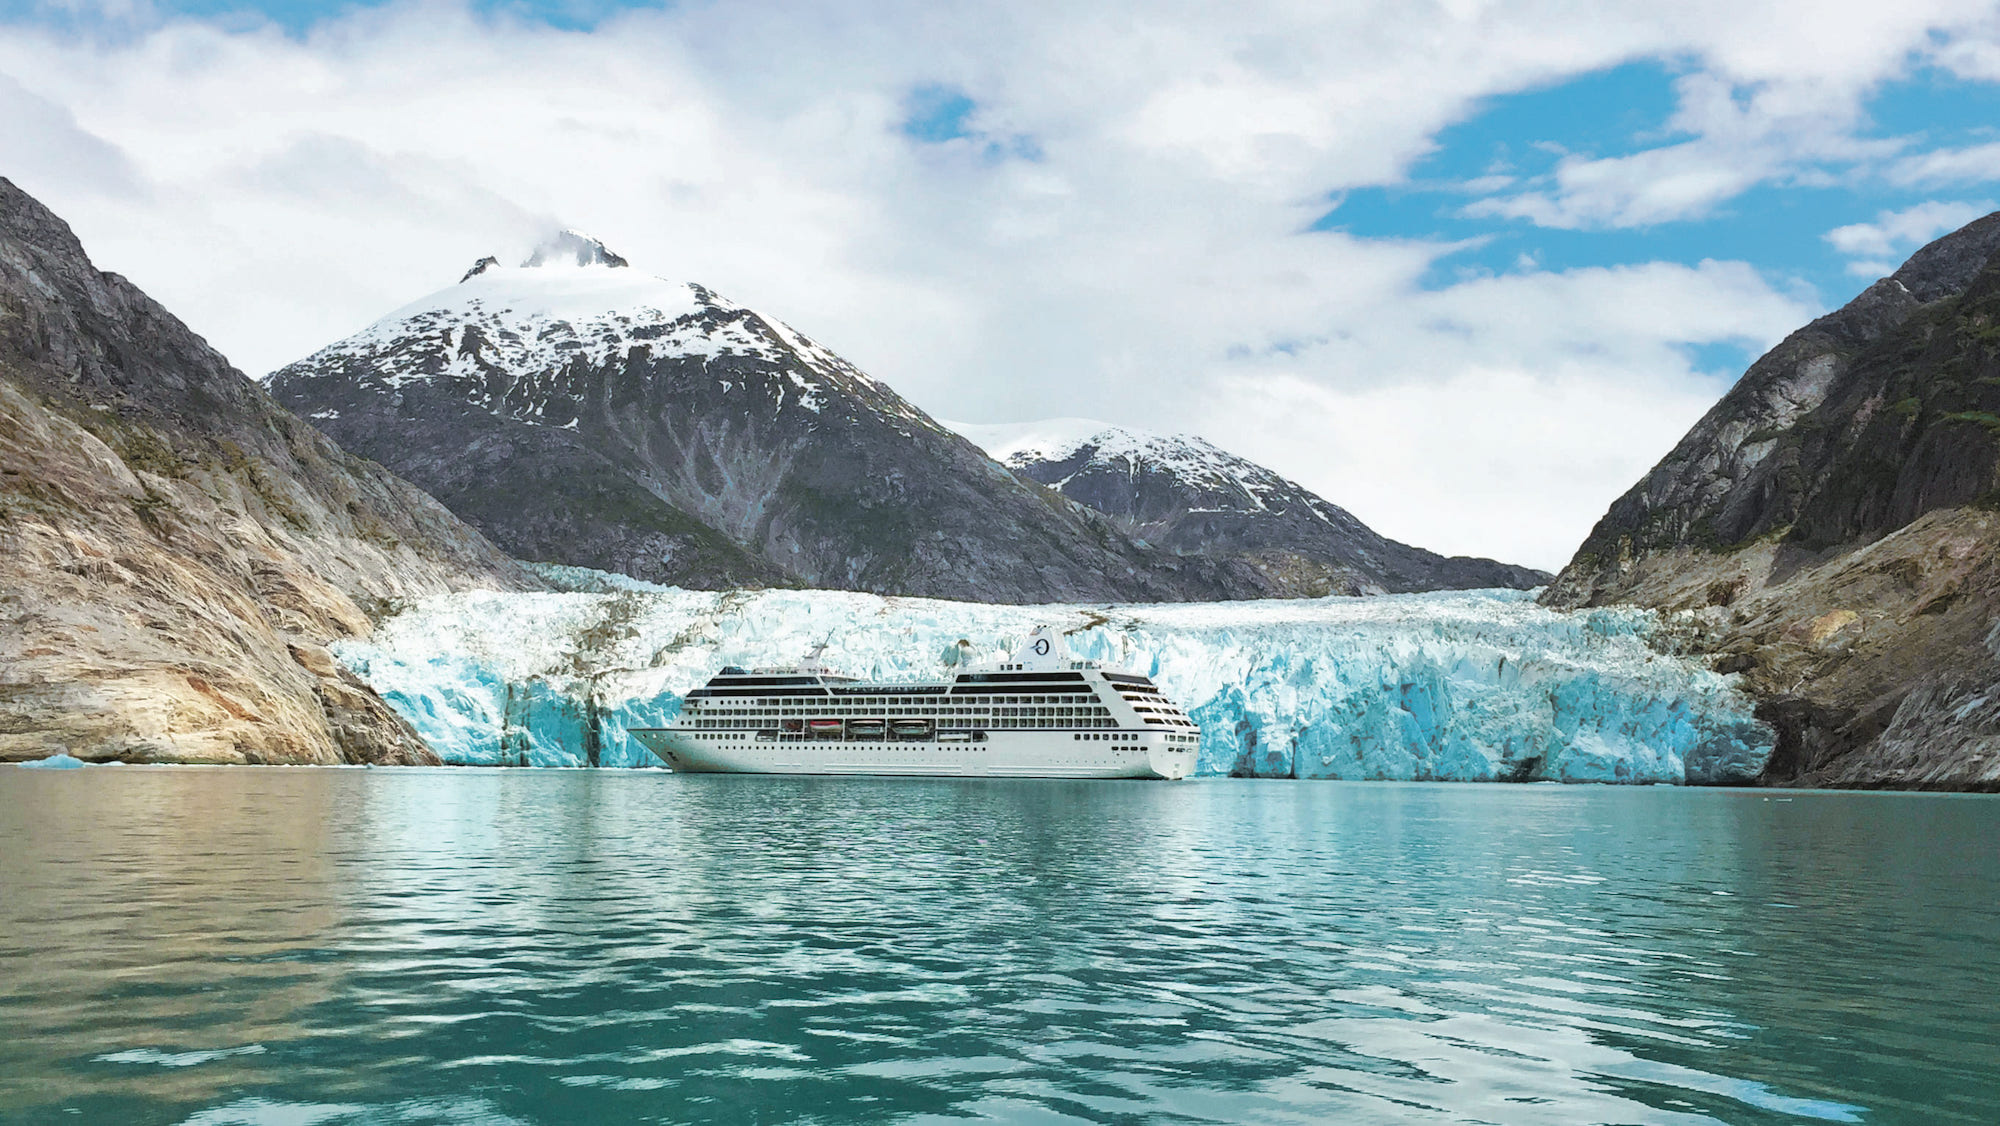 Discover the magnificent and untamed Alaska with Oceania Cruises